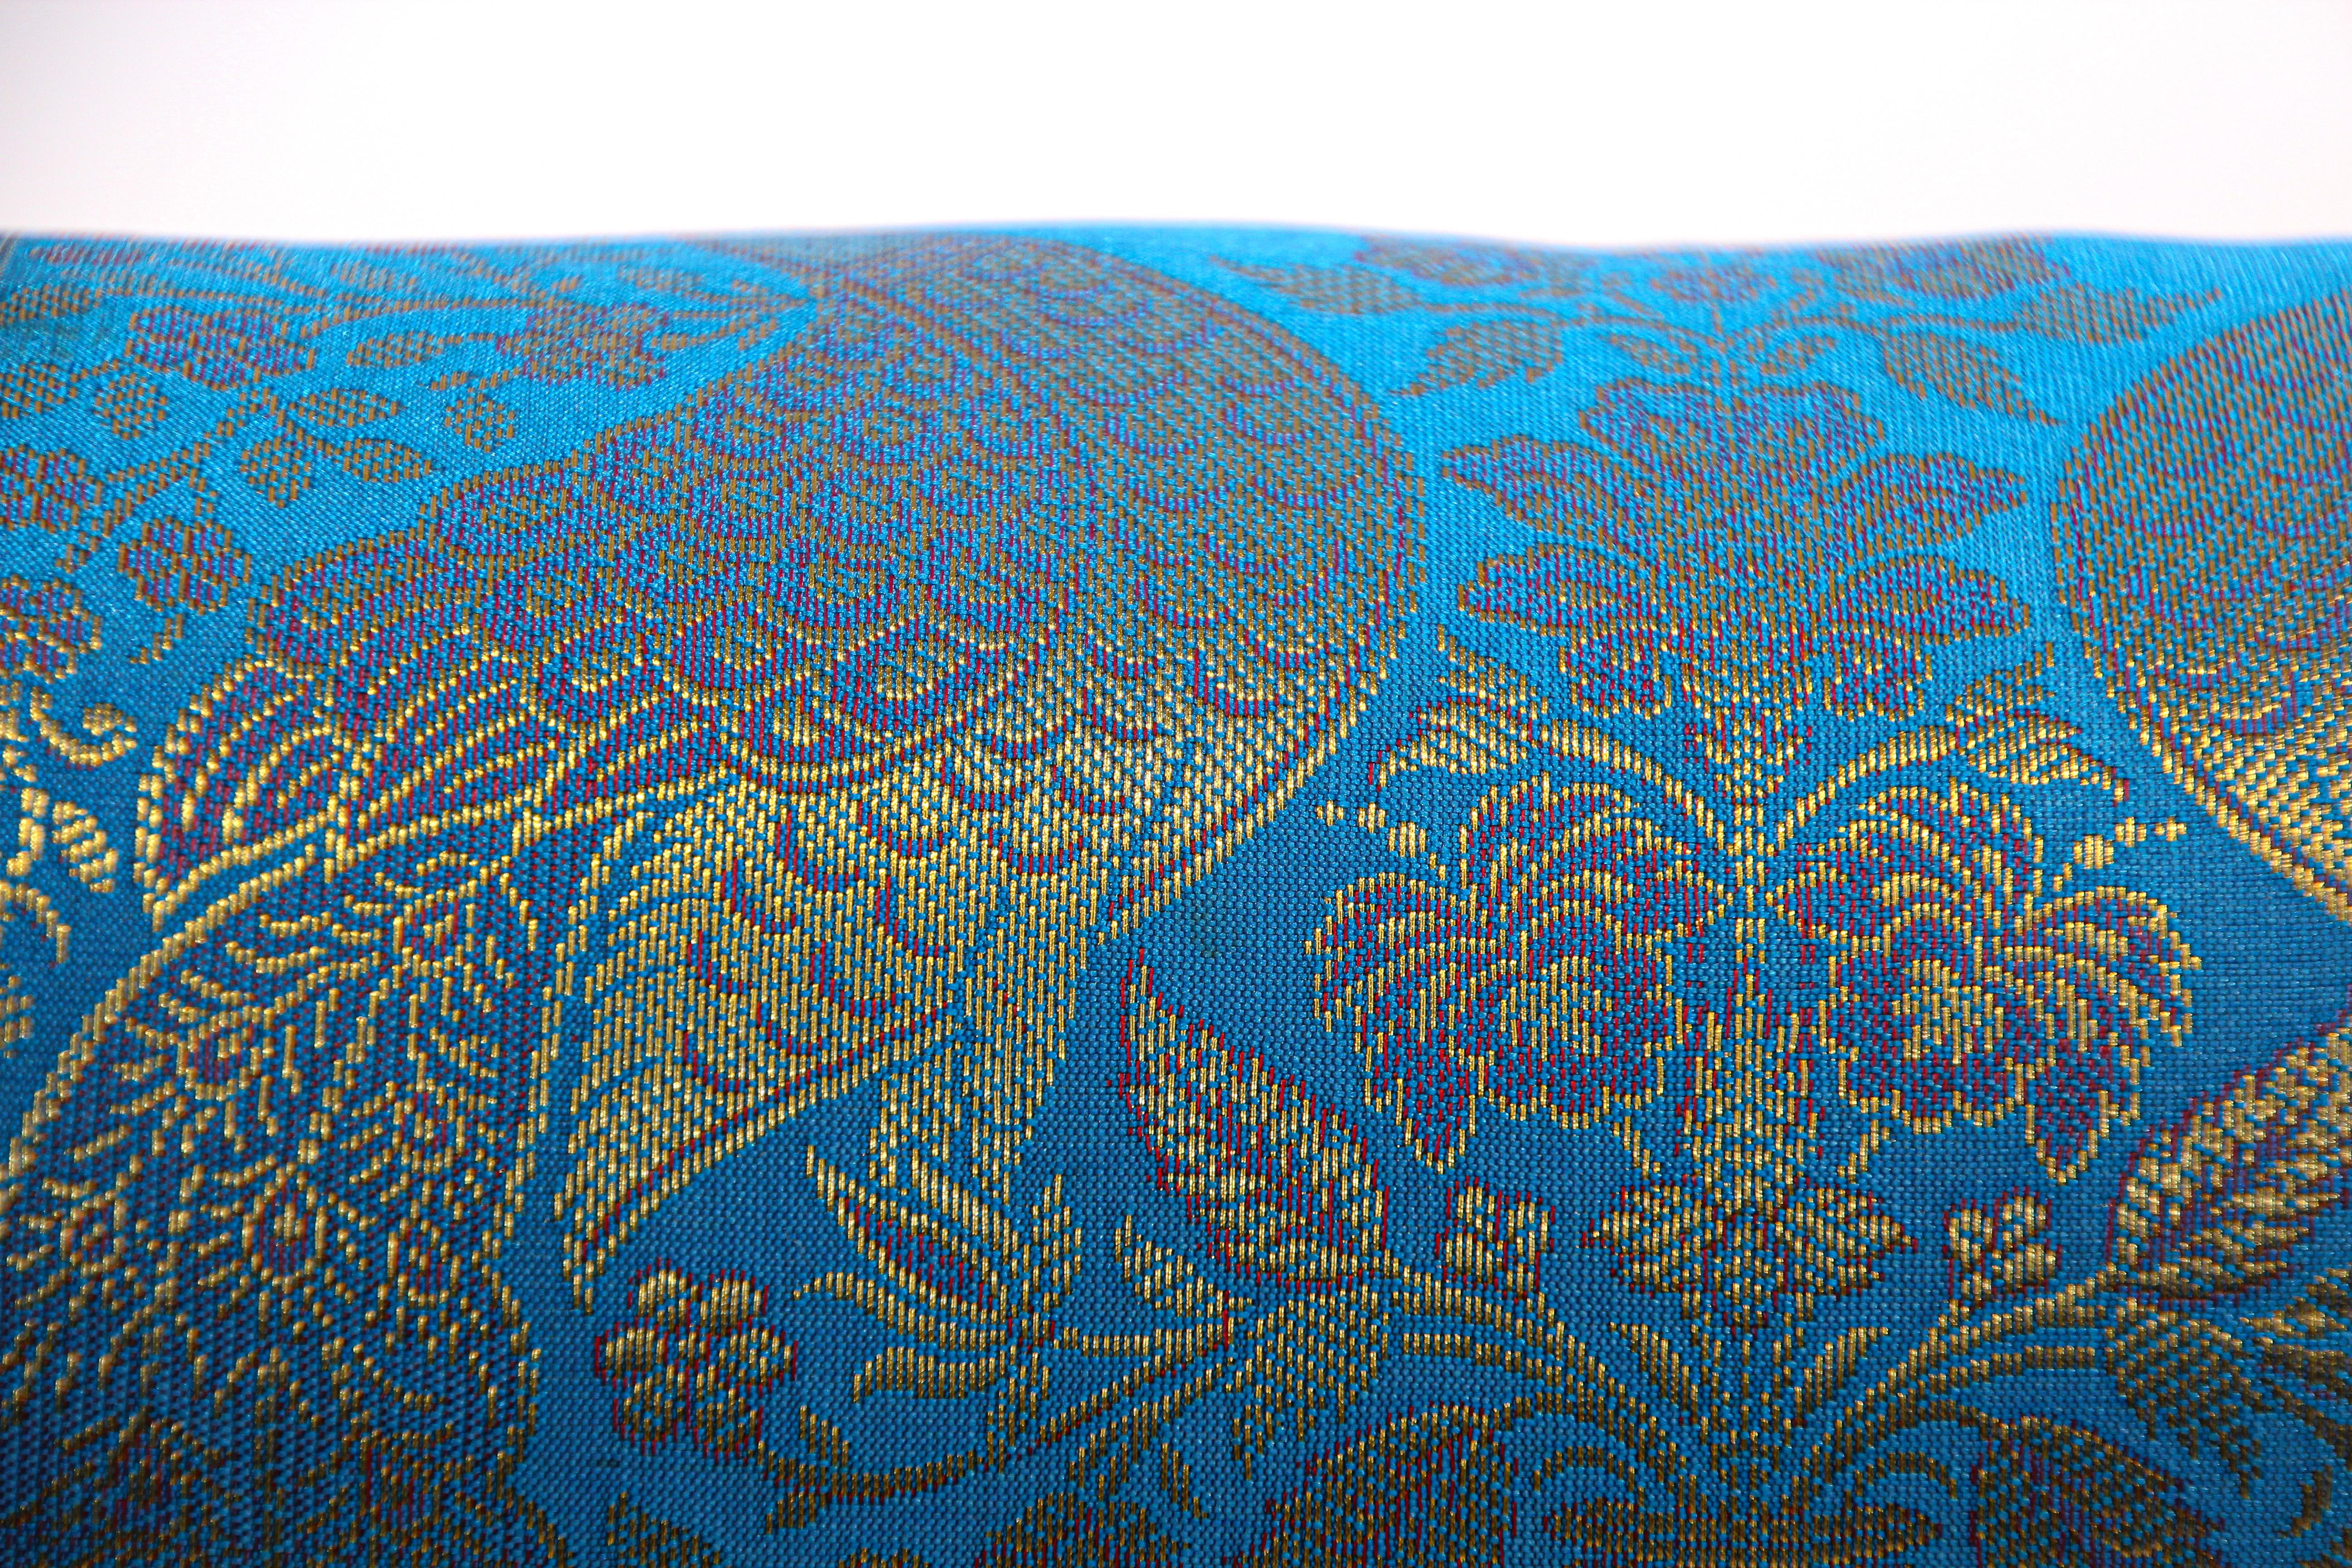 Vintage Brocade Silk Bolster Pillows Turquoise Blue and Gold Colors with Peacock For Sale 3